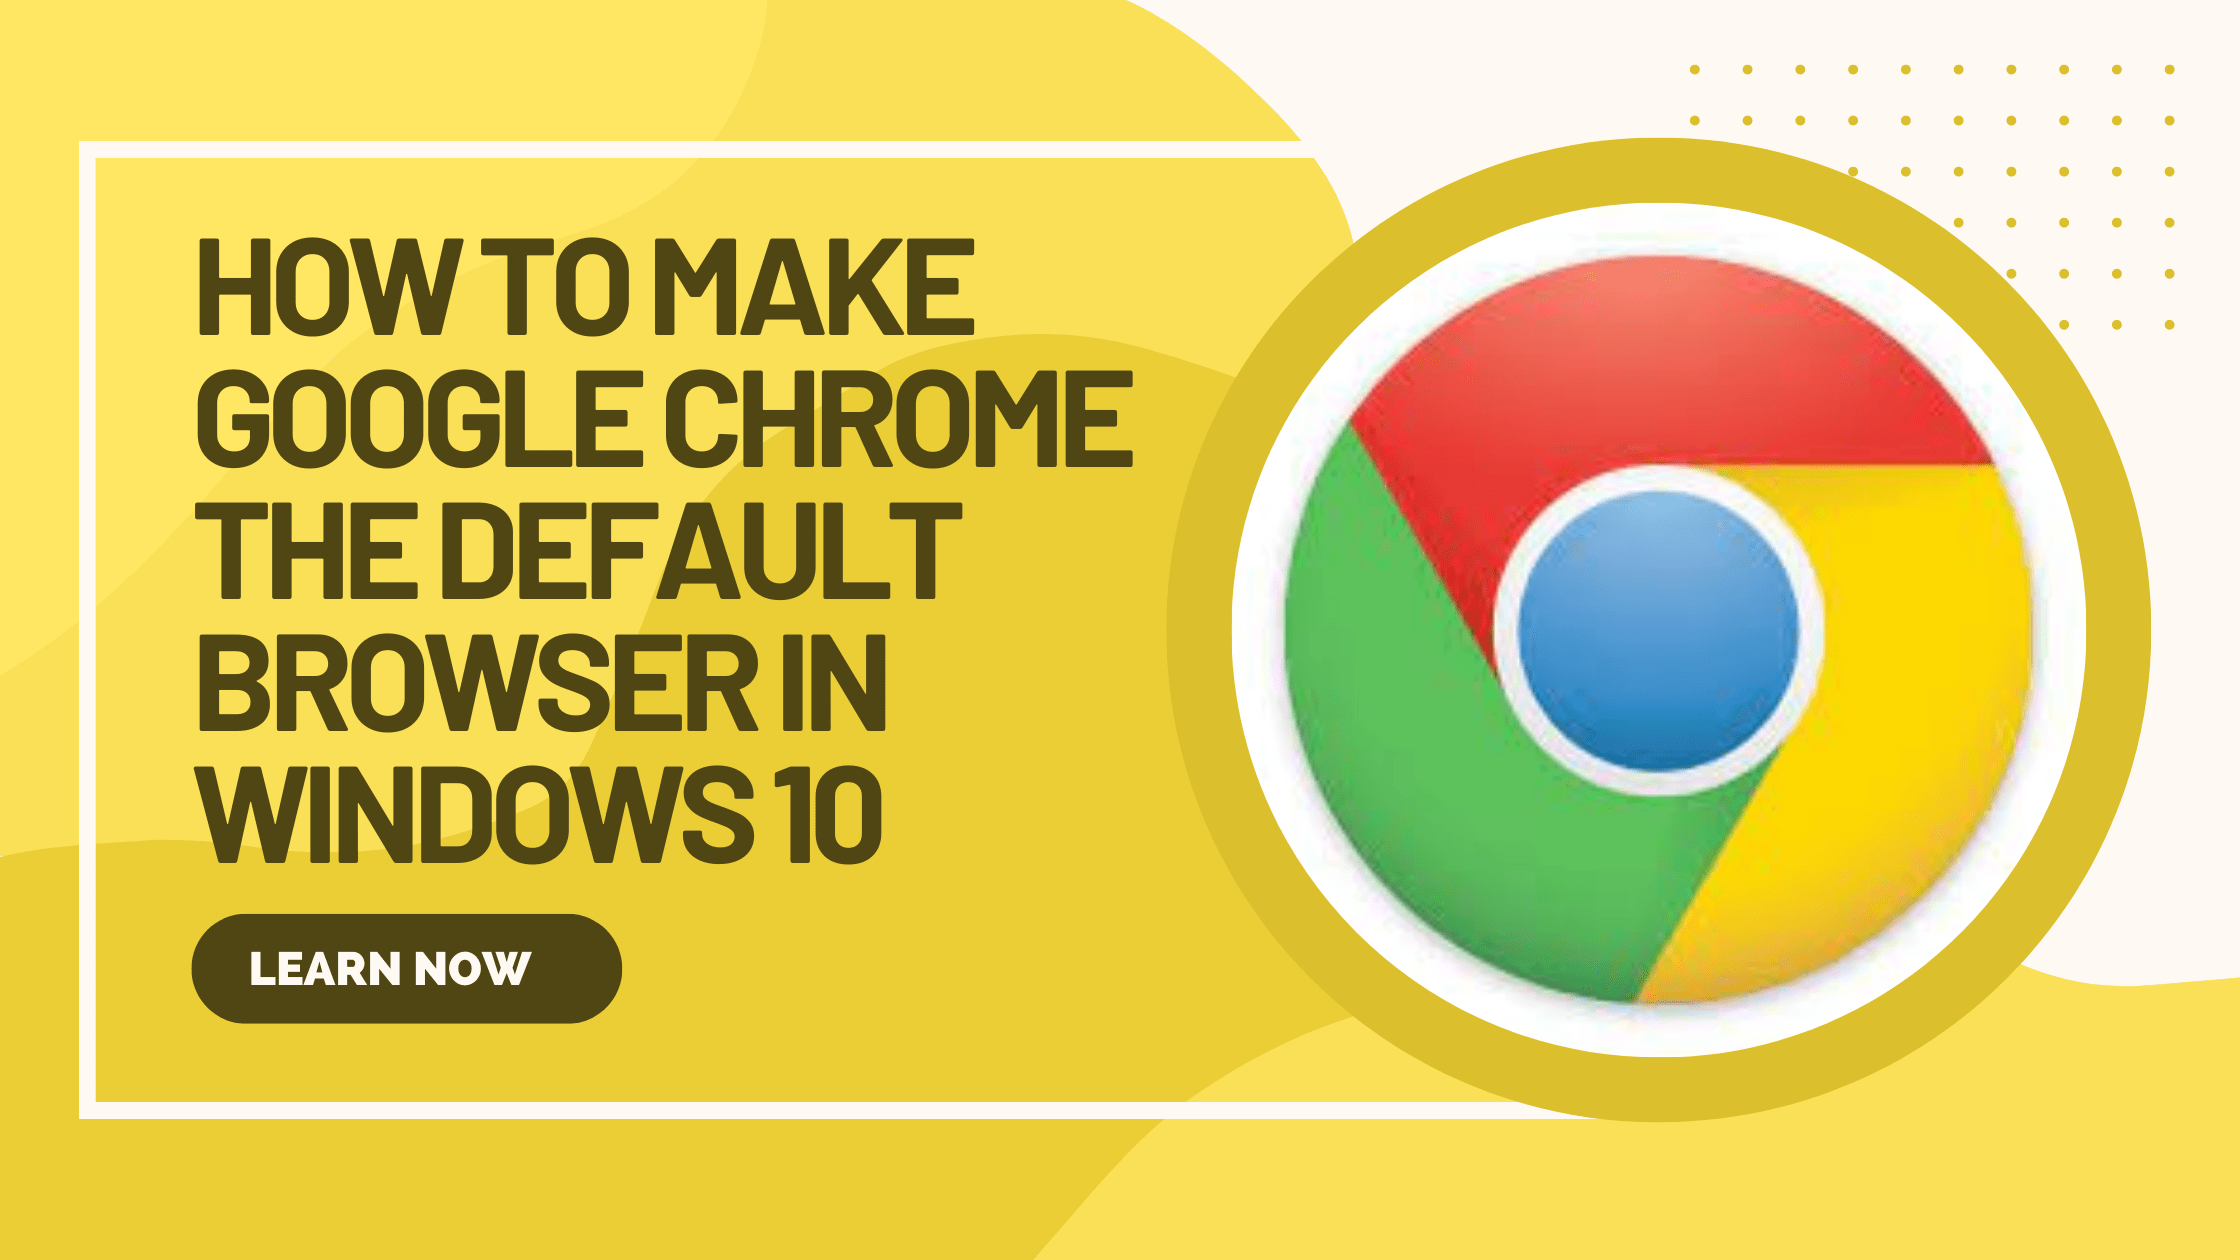 How to make Google Chrome the default browser in windows 10